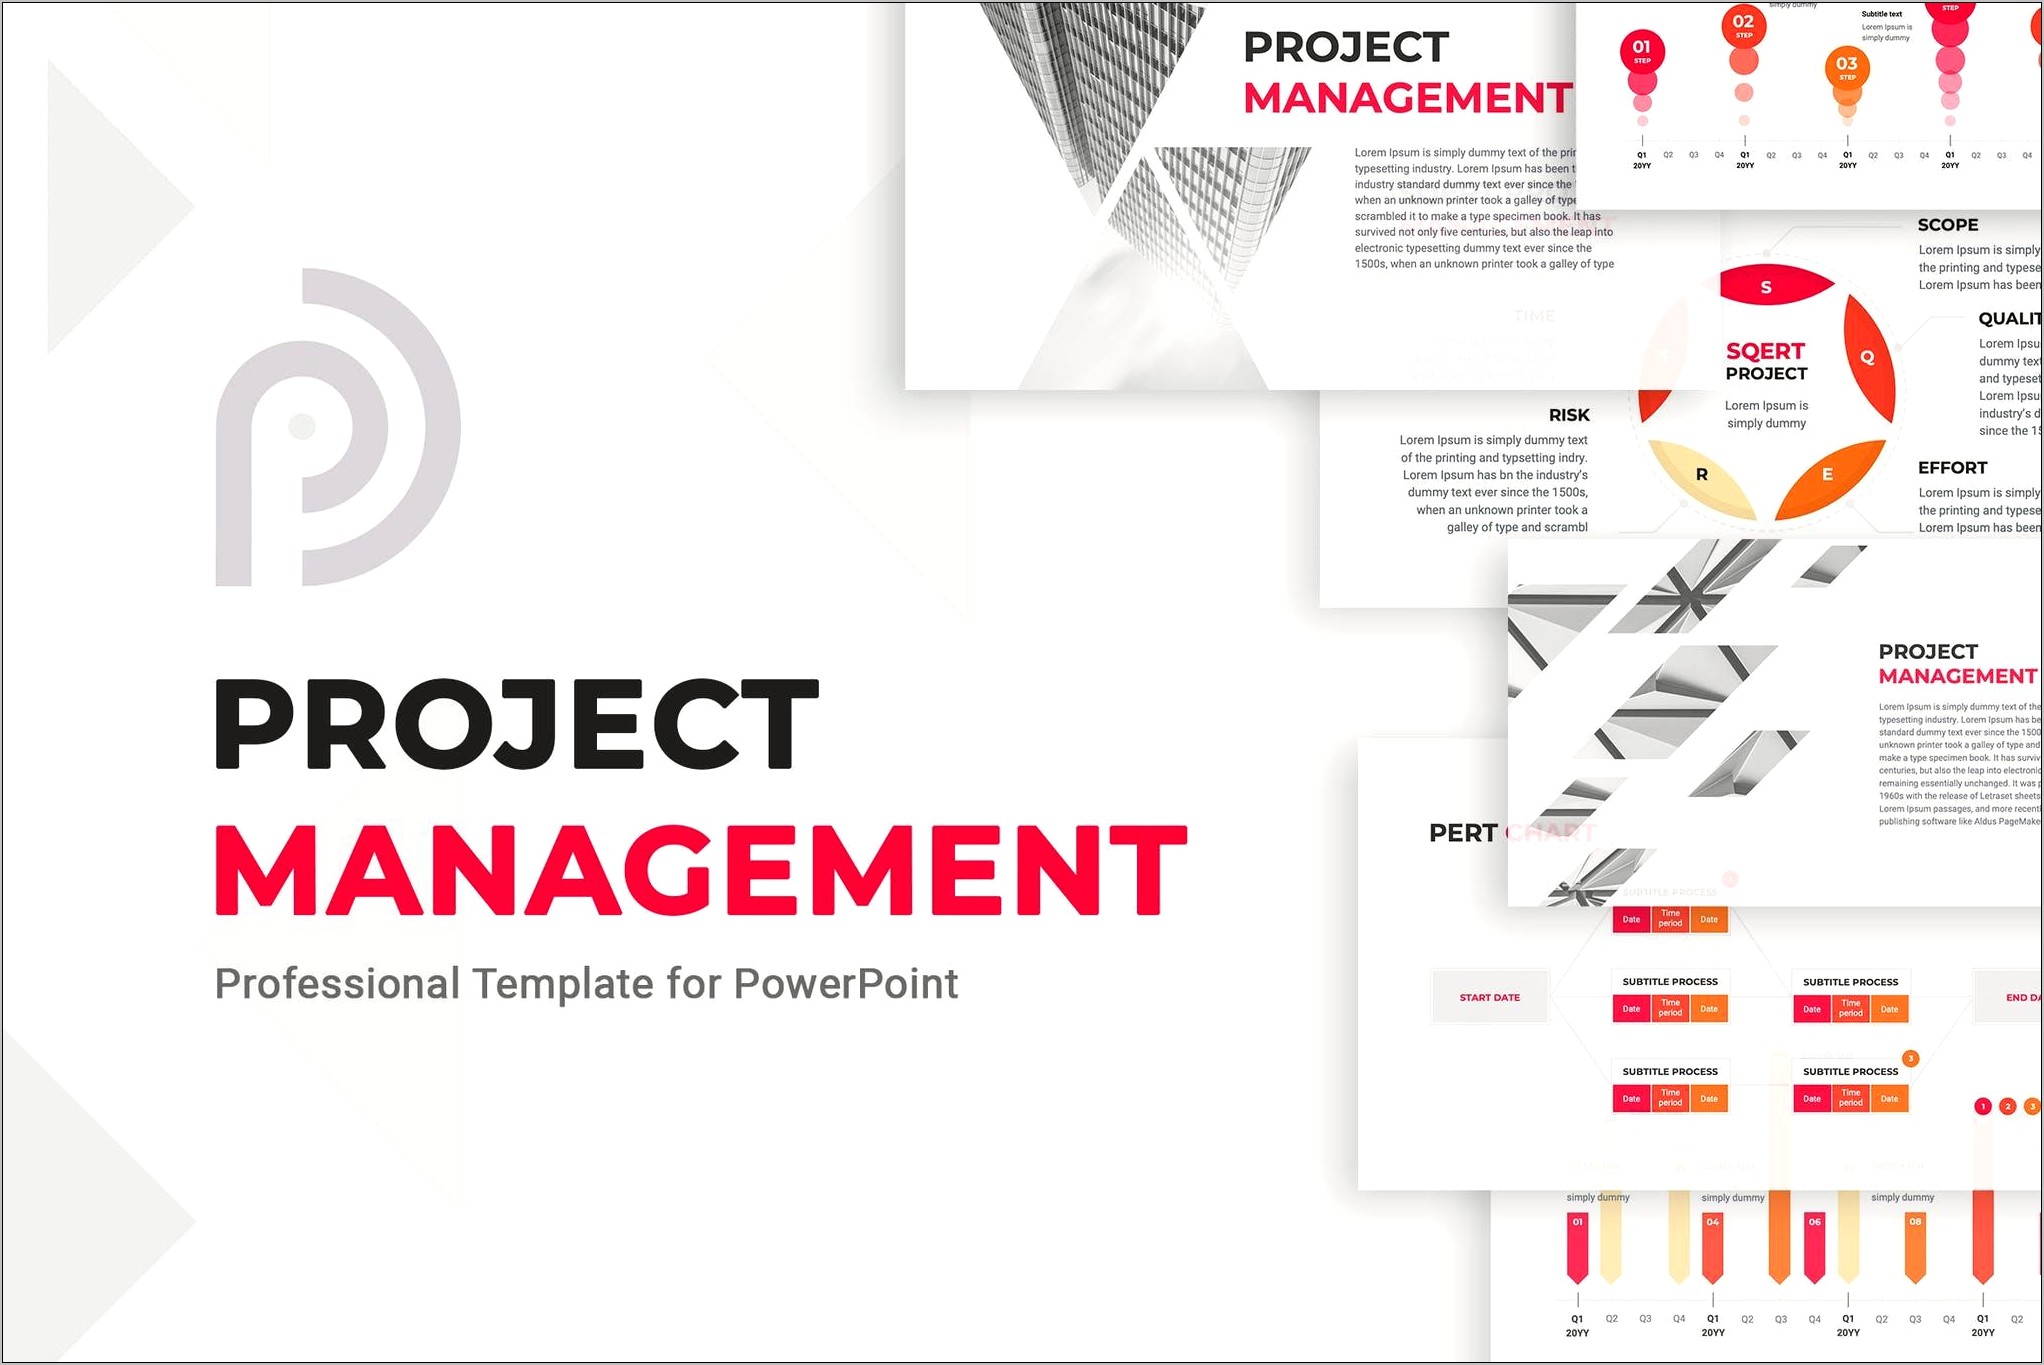 project-management-ppt-template-free-download-resume-example-gallery